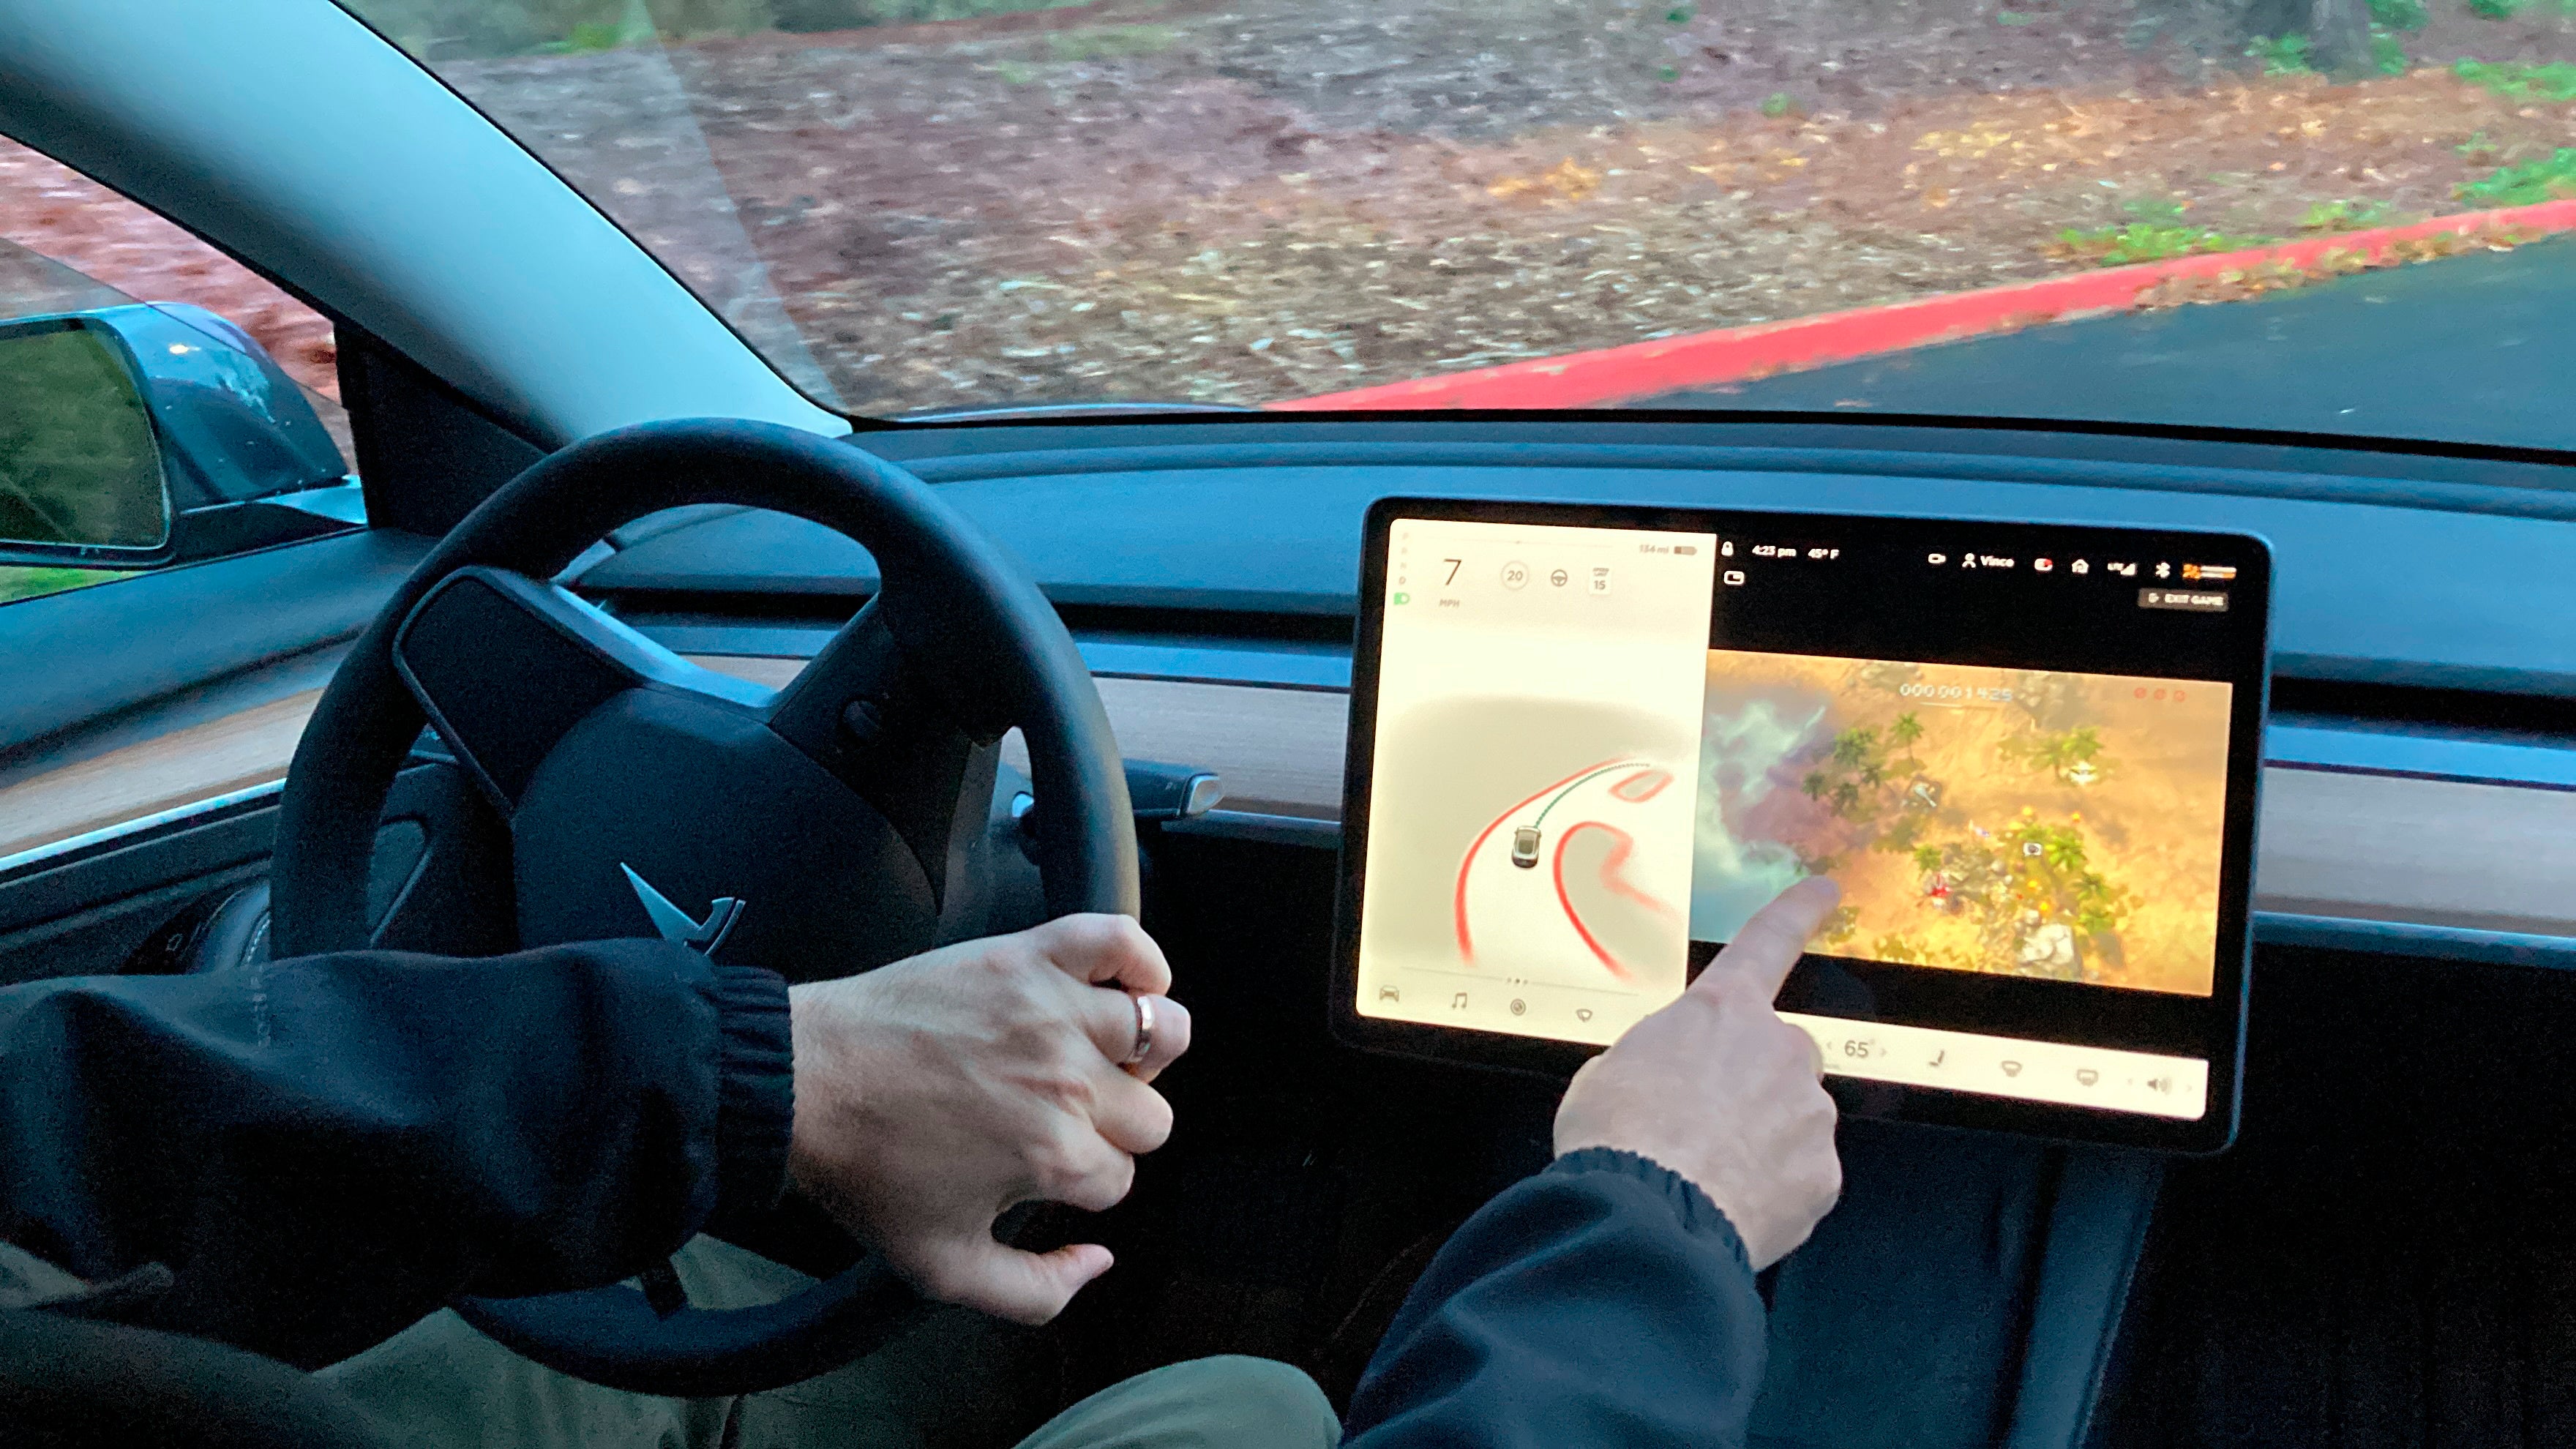 Vince Patton, a new Tesla owner, demonstrates how he can play video games on the vehicle’s console while driving